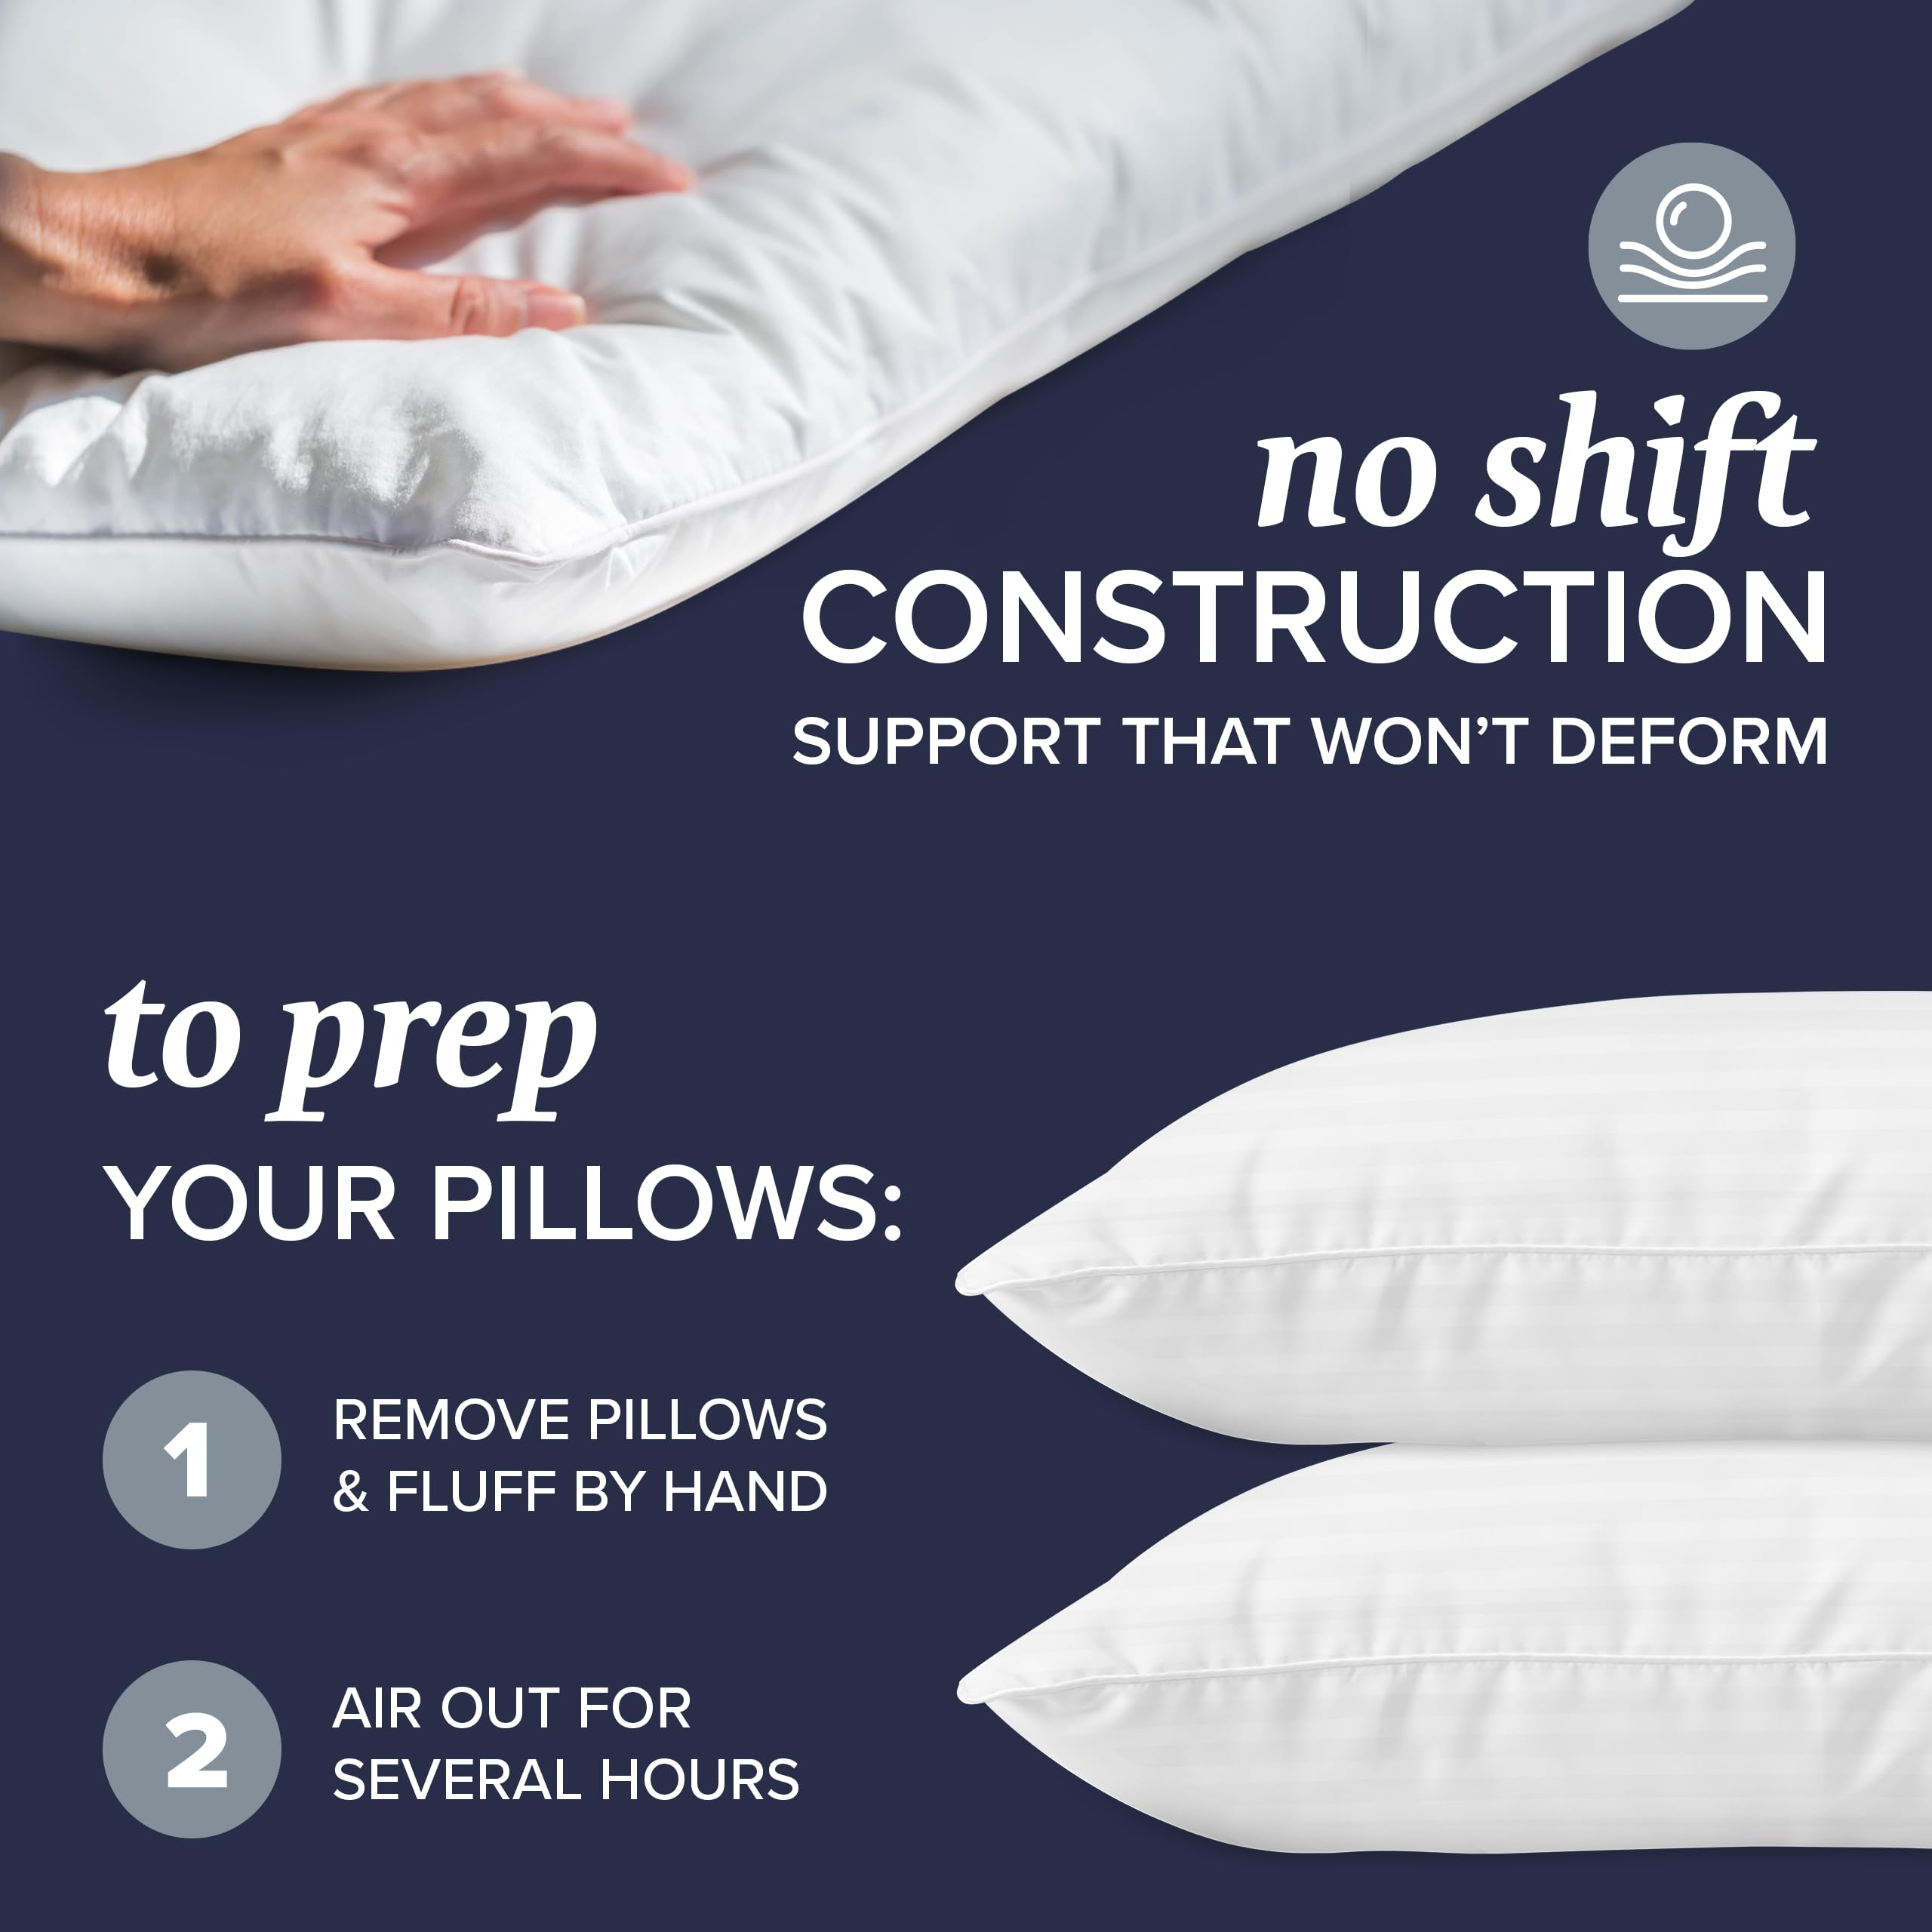 Beckham Hotel Collection Bed Pillows Standard / Queen Size Set of 2 - Down Alternative Bedding Gel Cooling Pillow for Back, Stomach or Side Sleepers - new